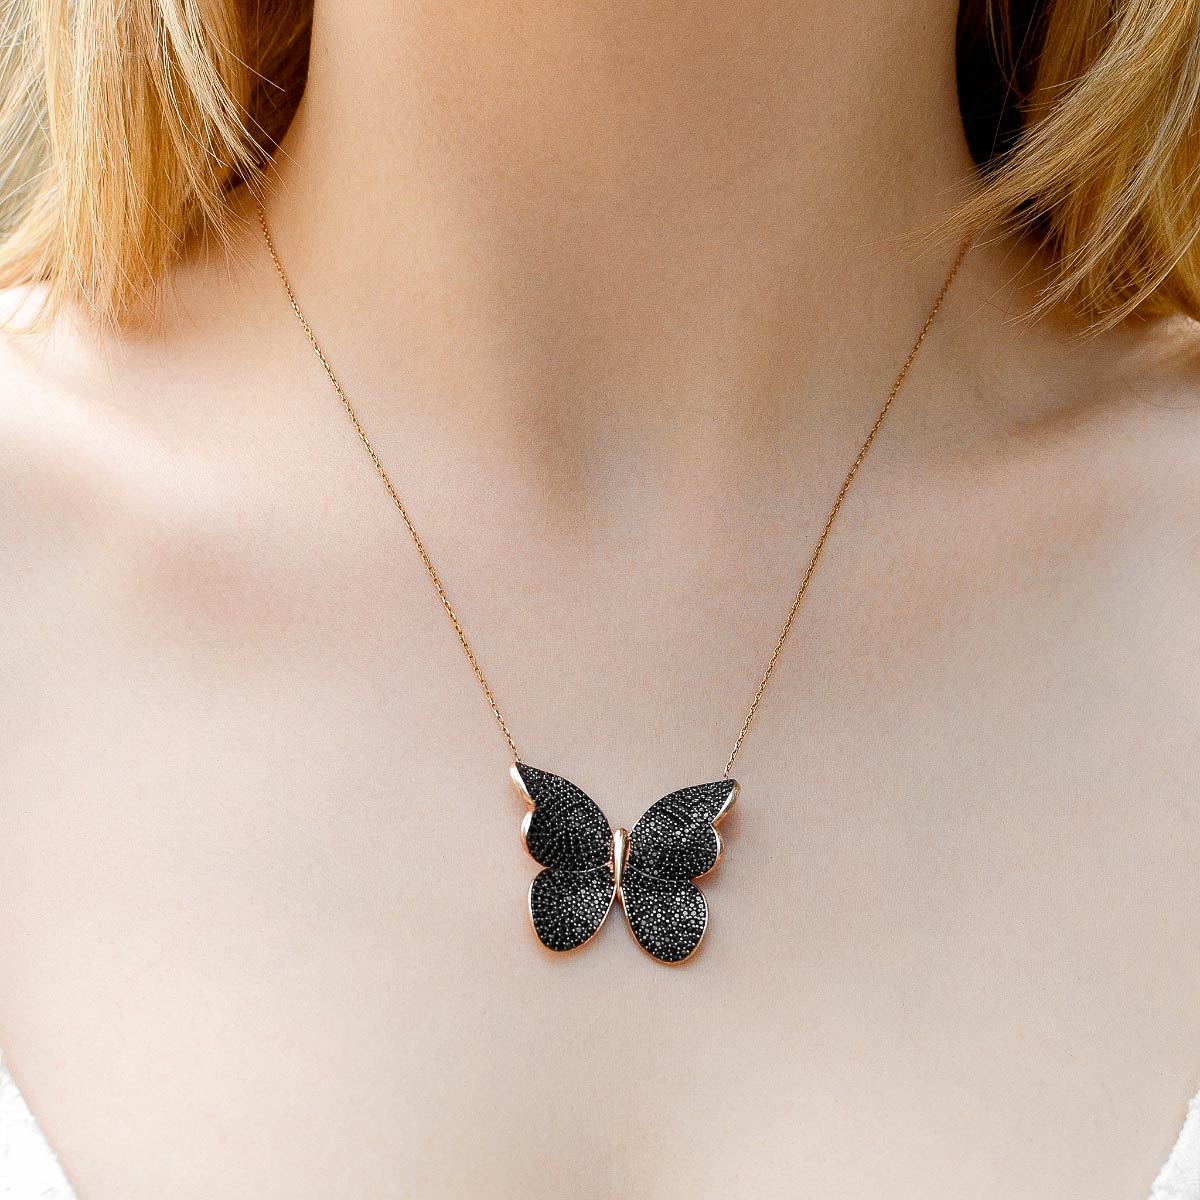 To My Best Friend, Strong Wings - Black Crystal Butterfly Necklace Gift Set